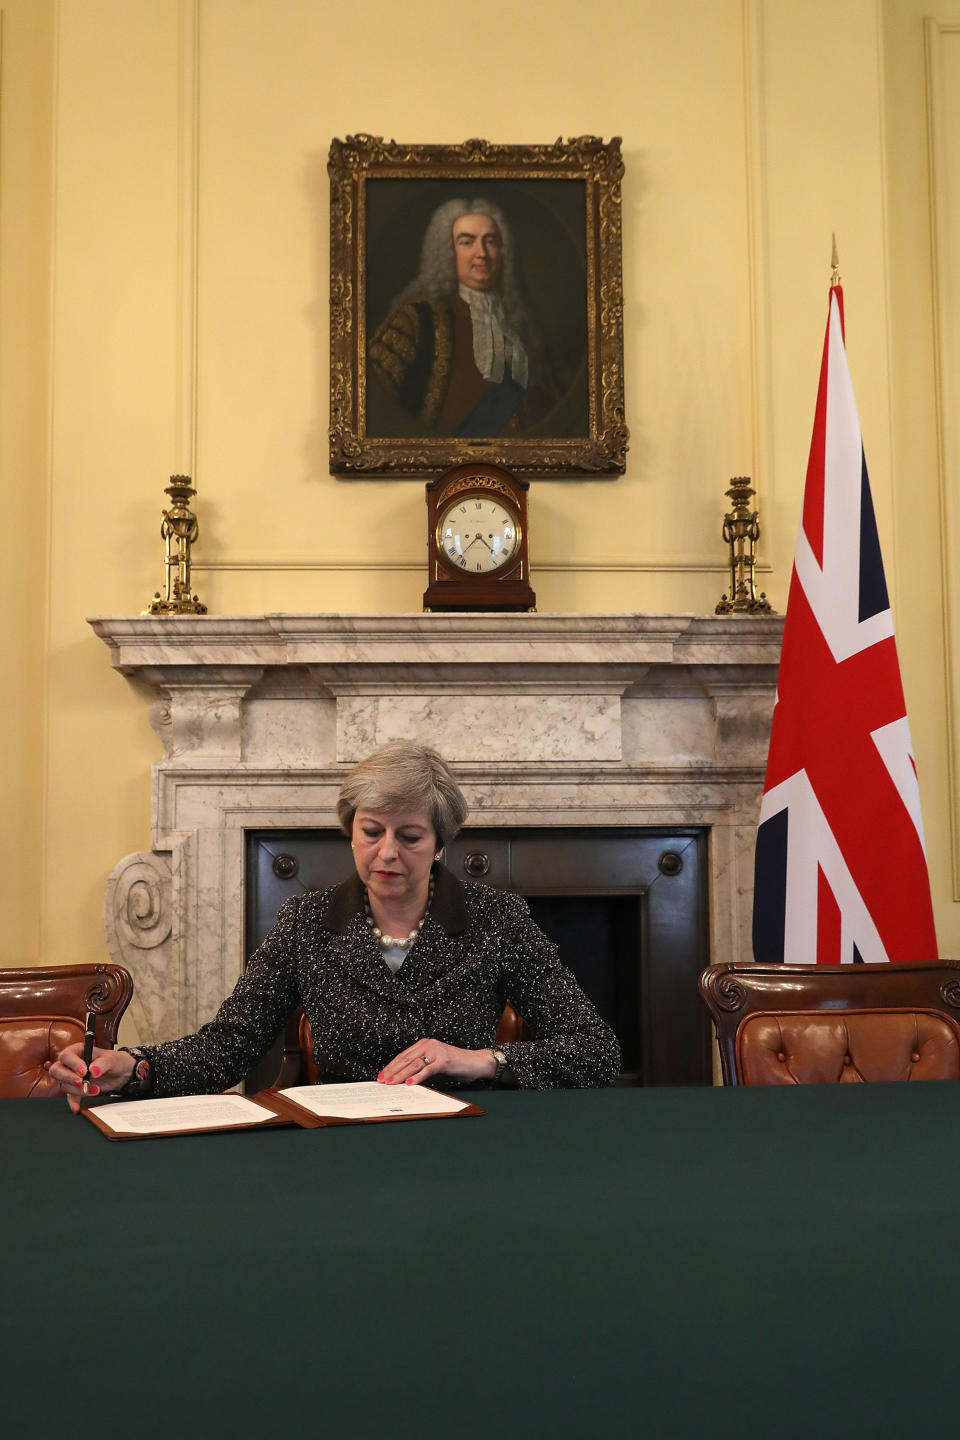 Prime Minister Theresa May in the cabinet signs the Article 50 letter, as she prepares to trigger the start of the UK’s formal withdrawal from the EU.